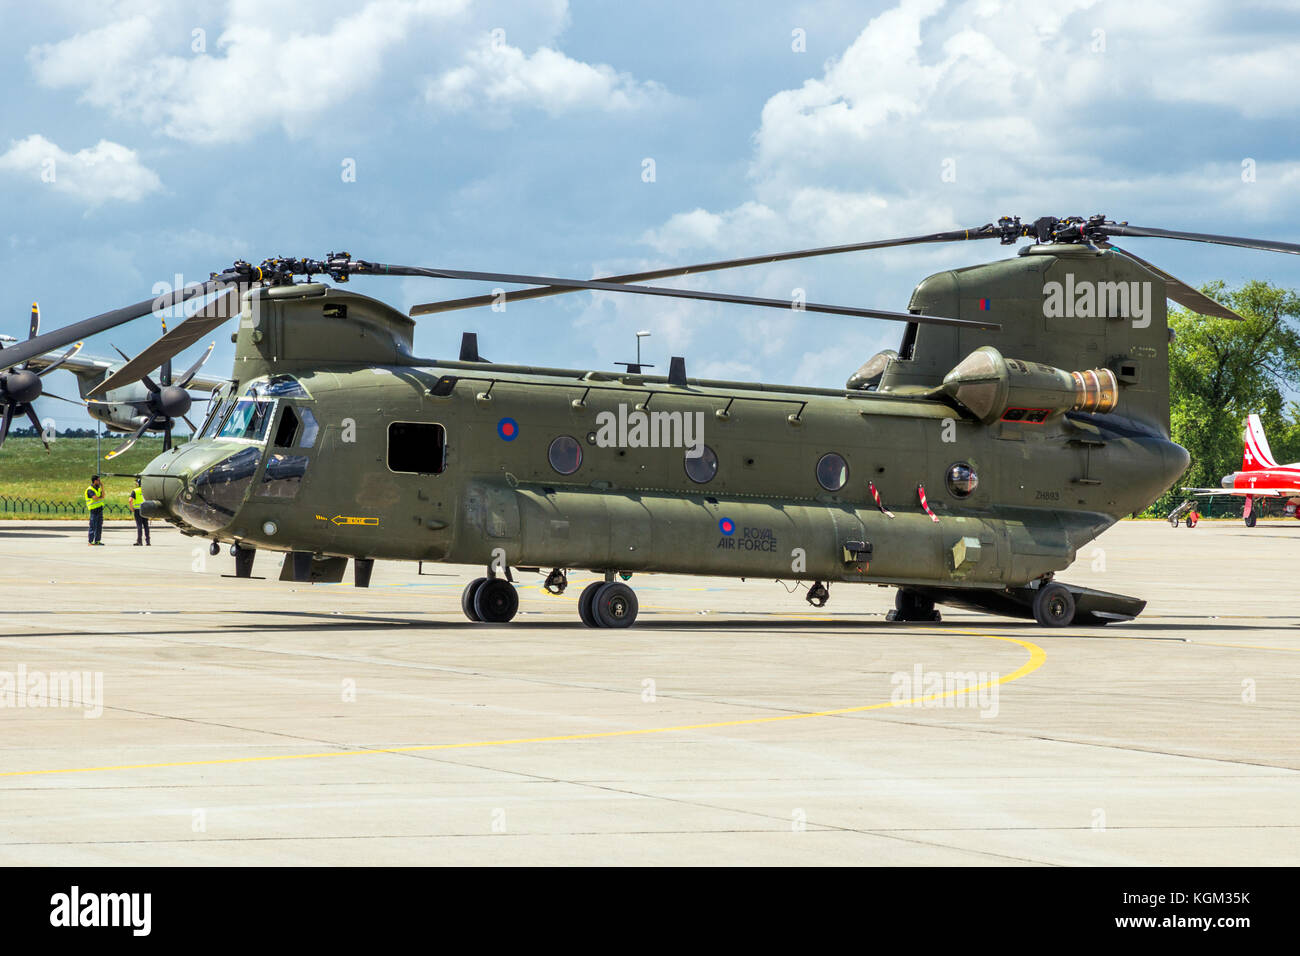 BERLIN - JUN 2, 2016: British Royal Air Force Boeing CH-47 Chinook transport helicopter at the Berlin ILA Airshow. Stock Photo